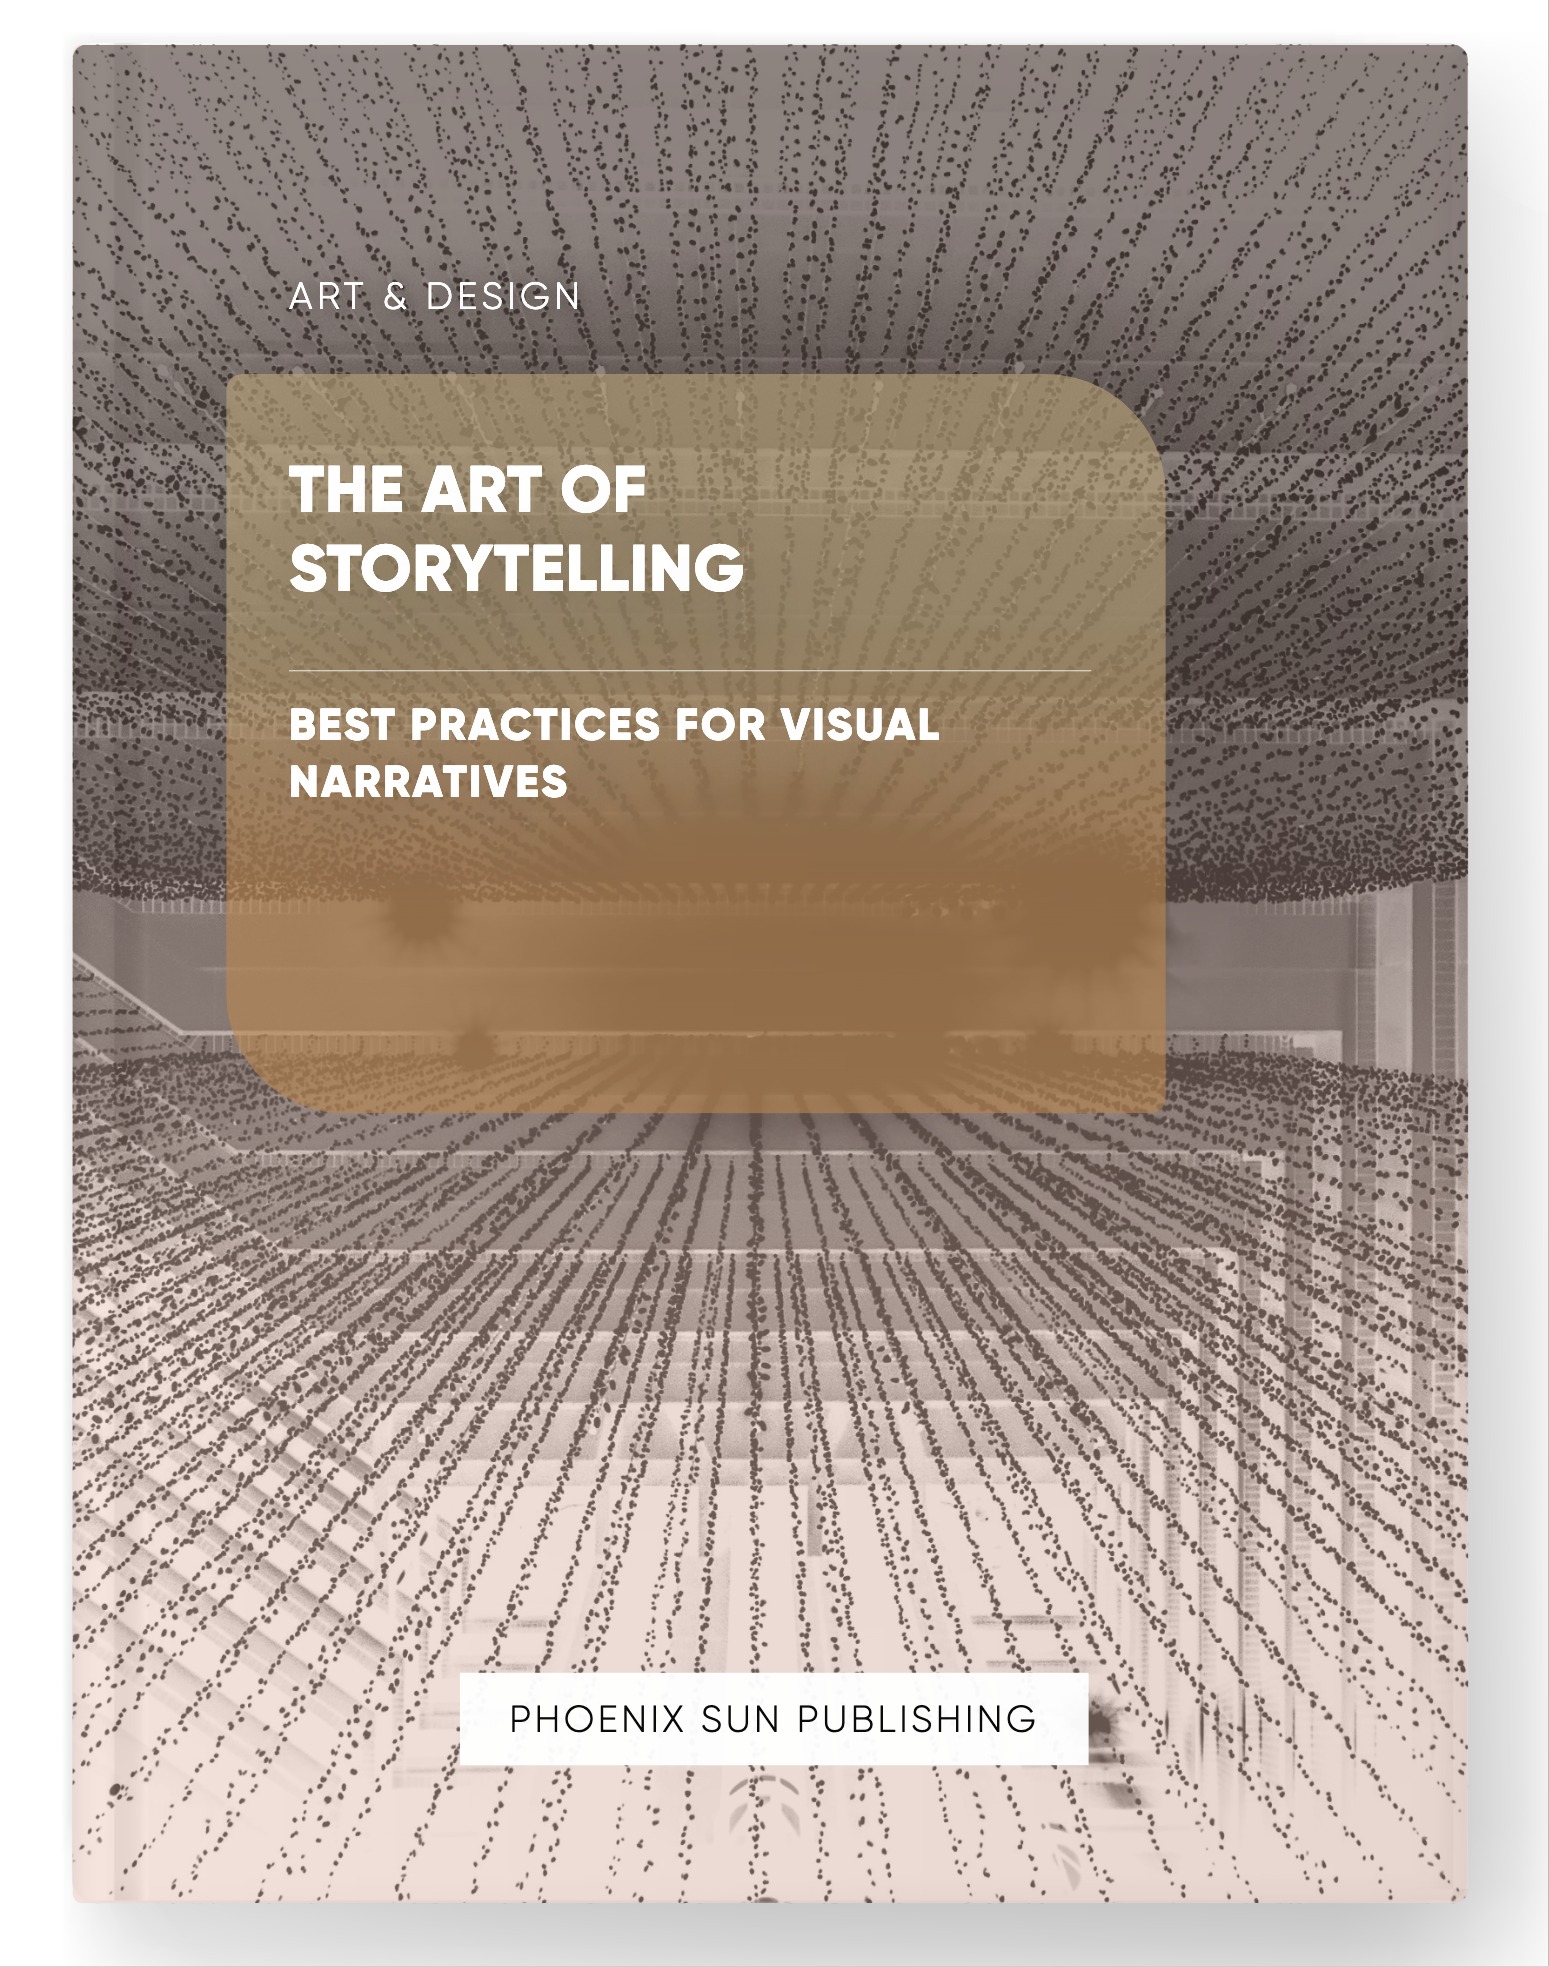 The Art of Storytelling – Best Practices for Visual Narratives